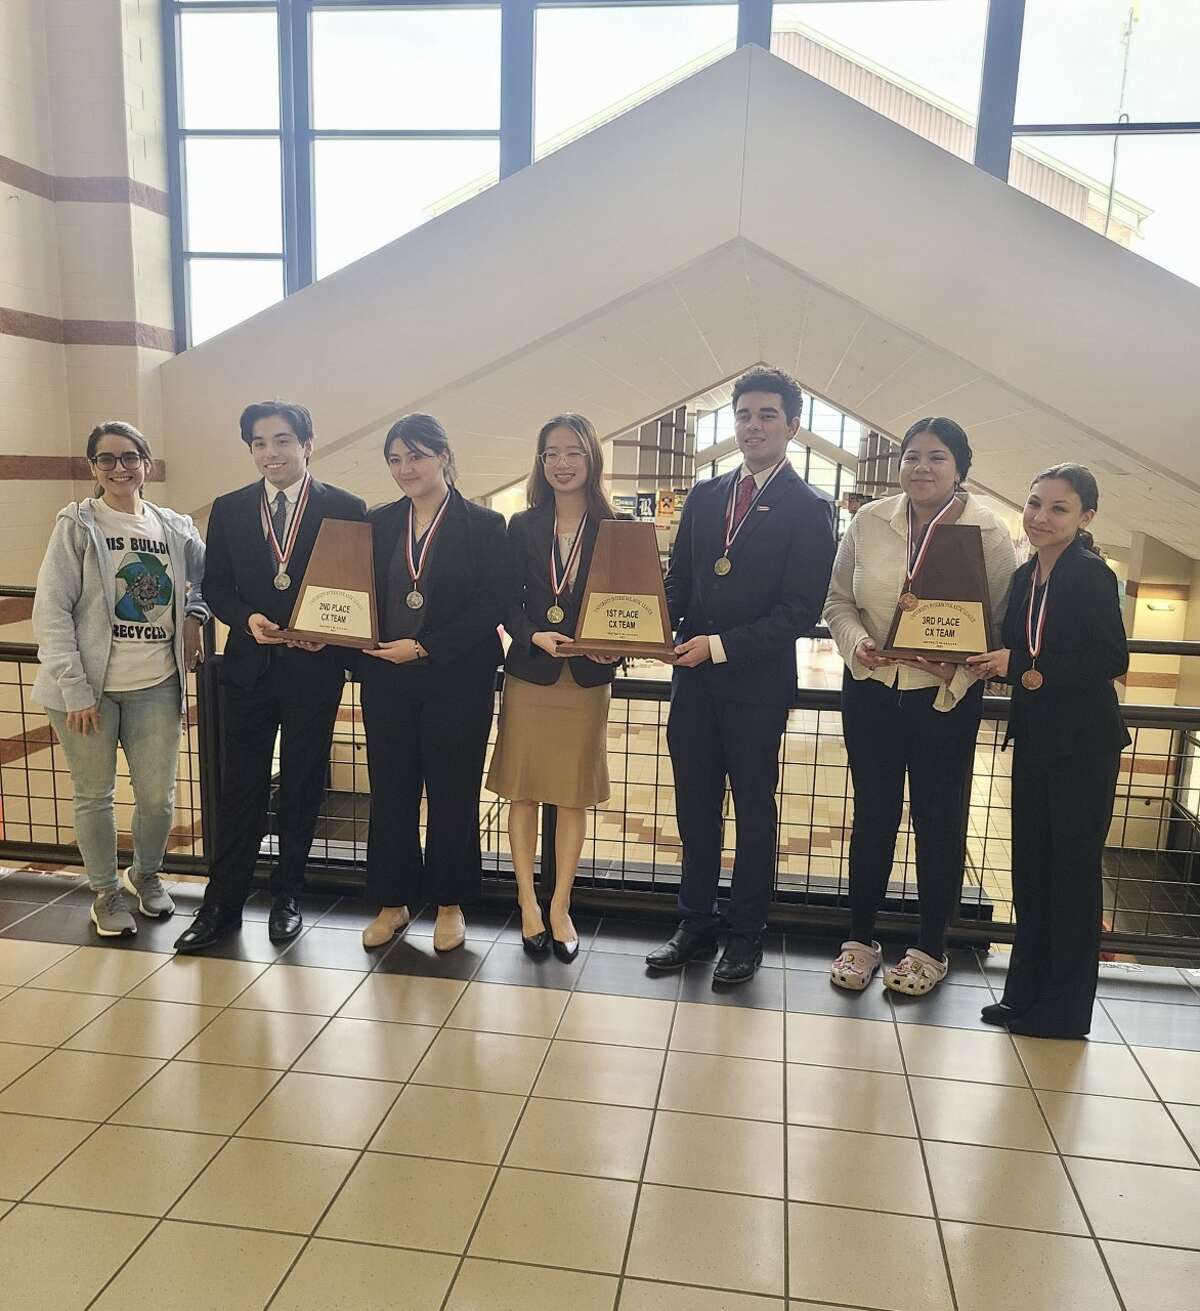 The Alexander CX Debate teams advanced to state at the UIL Academics District 30-6A competition.